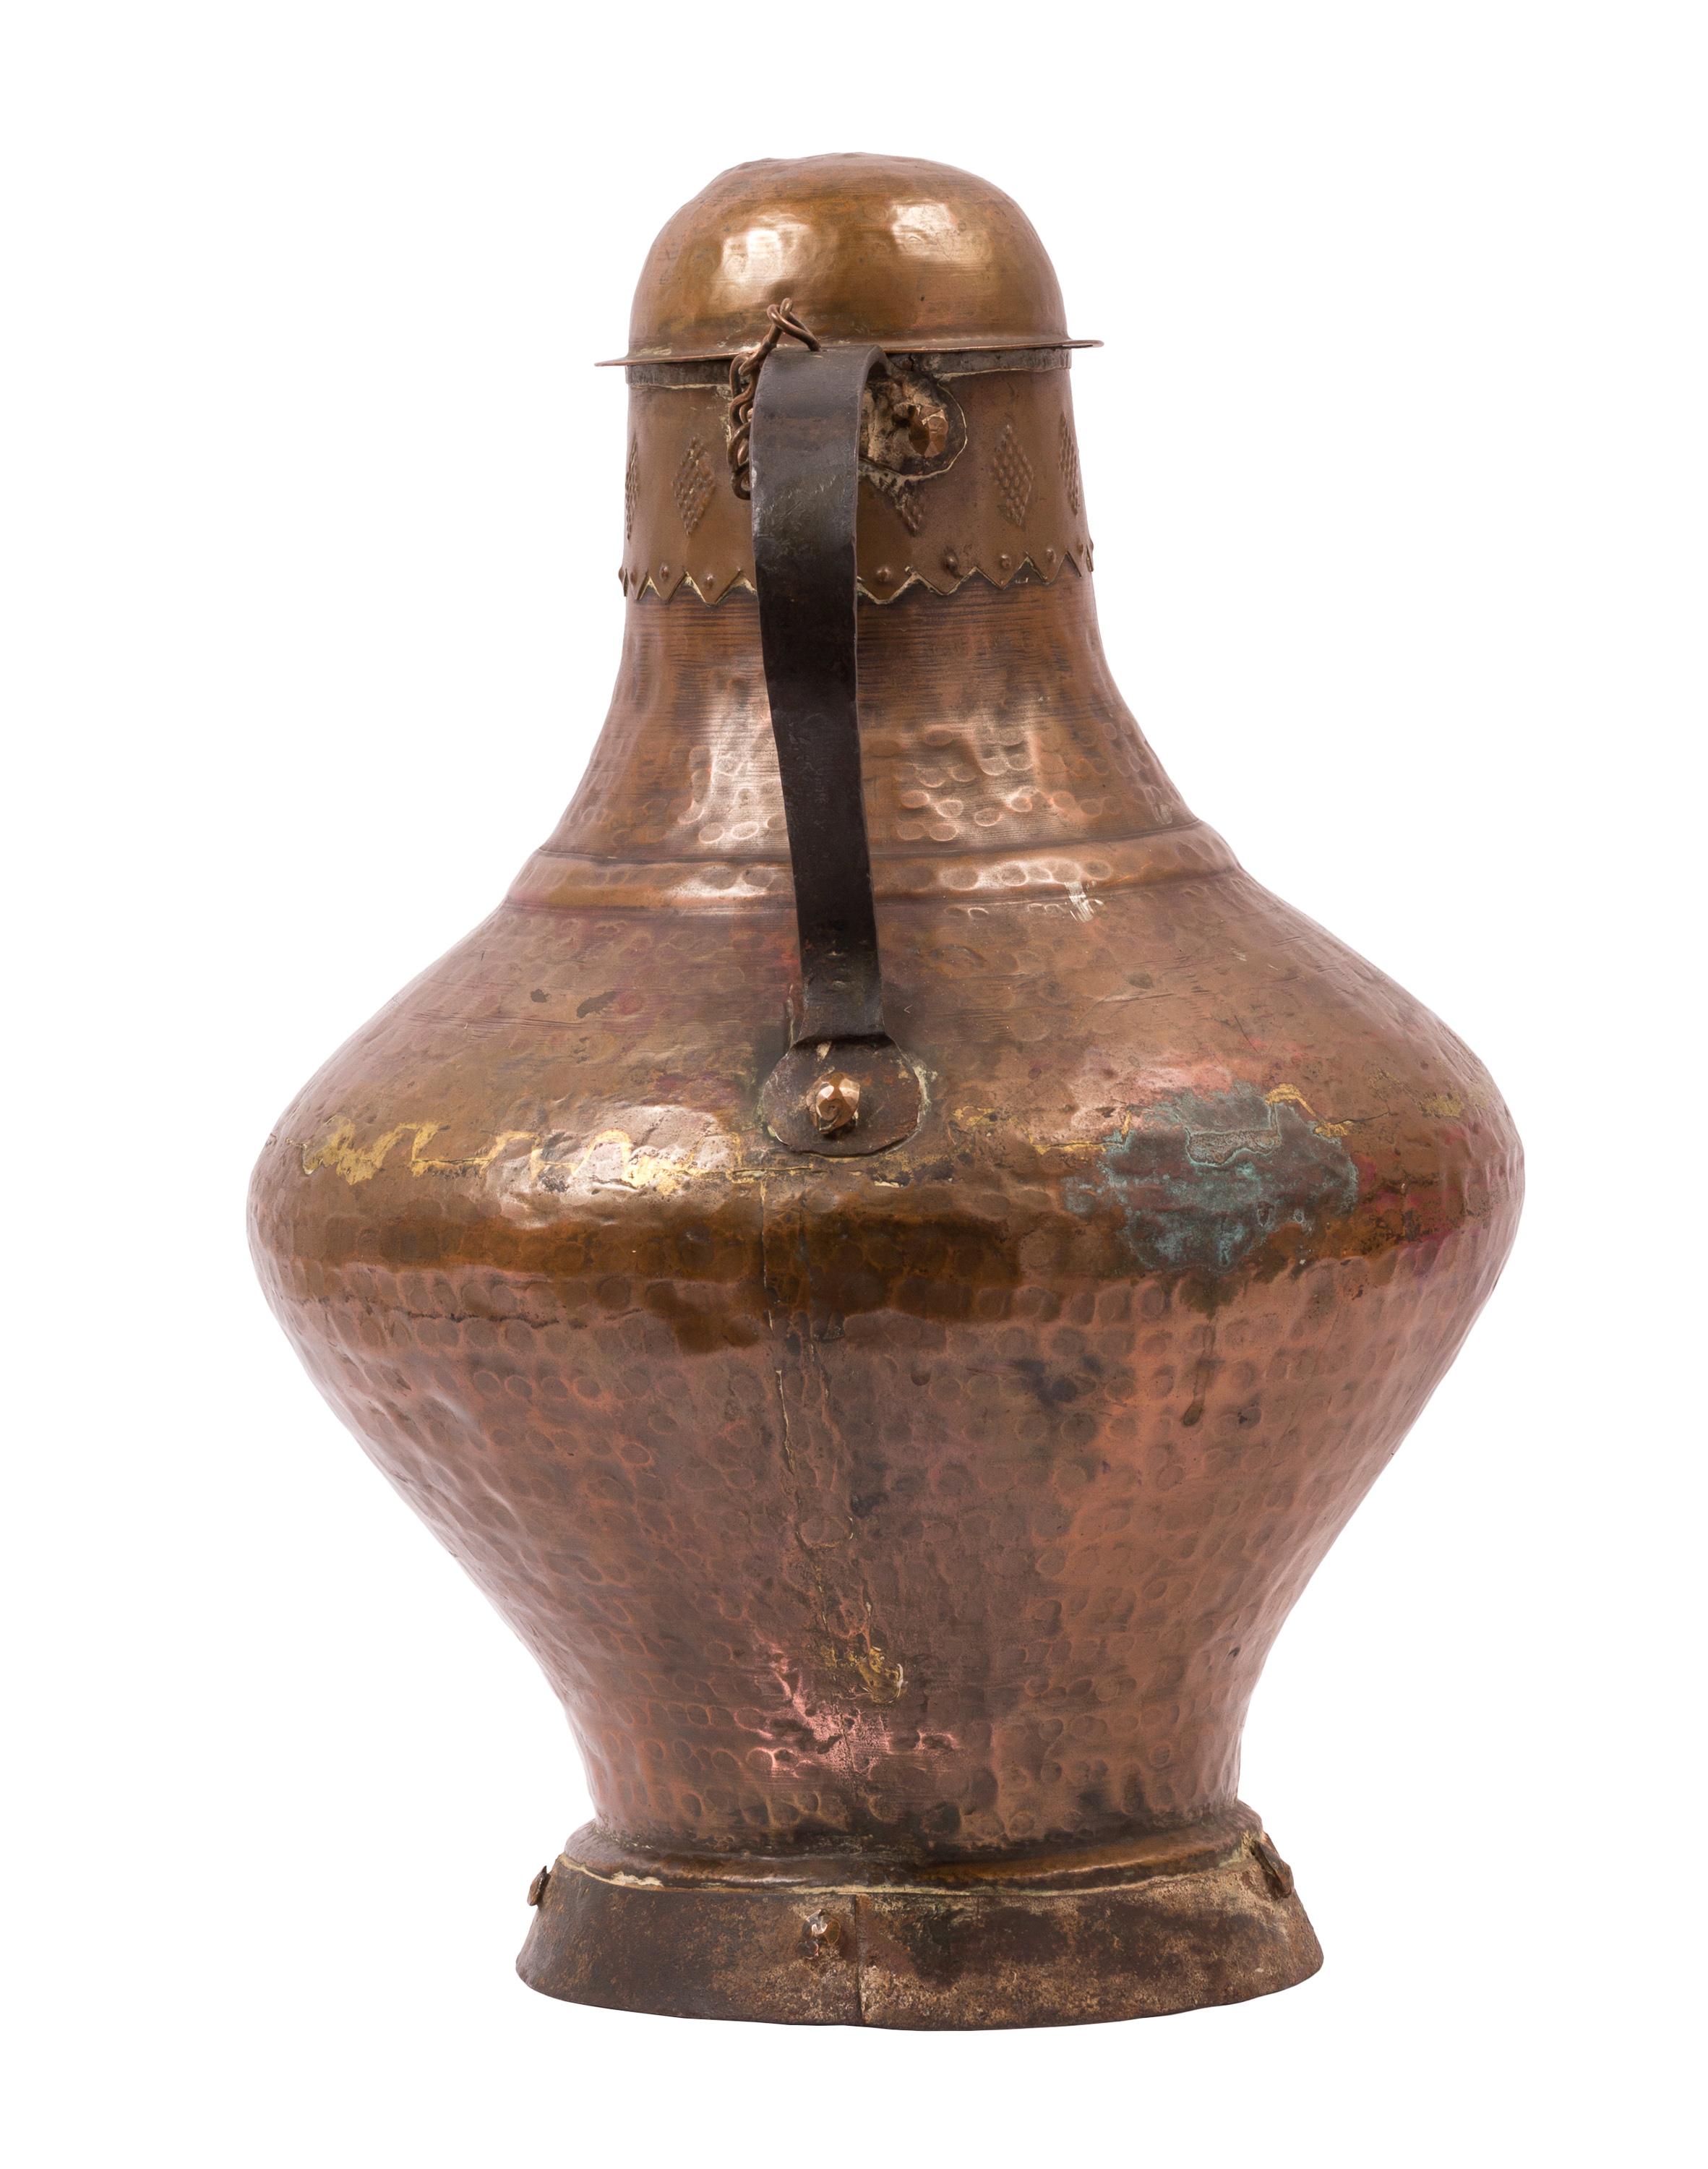 Copper containers of varying shapes and sizes have been used in Spanish homes and kitchens for many centuries. Copper and its alloys were particularly popular metals for storing and preparing foodstuffs, not only because they were durable, but